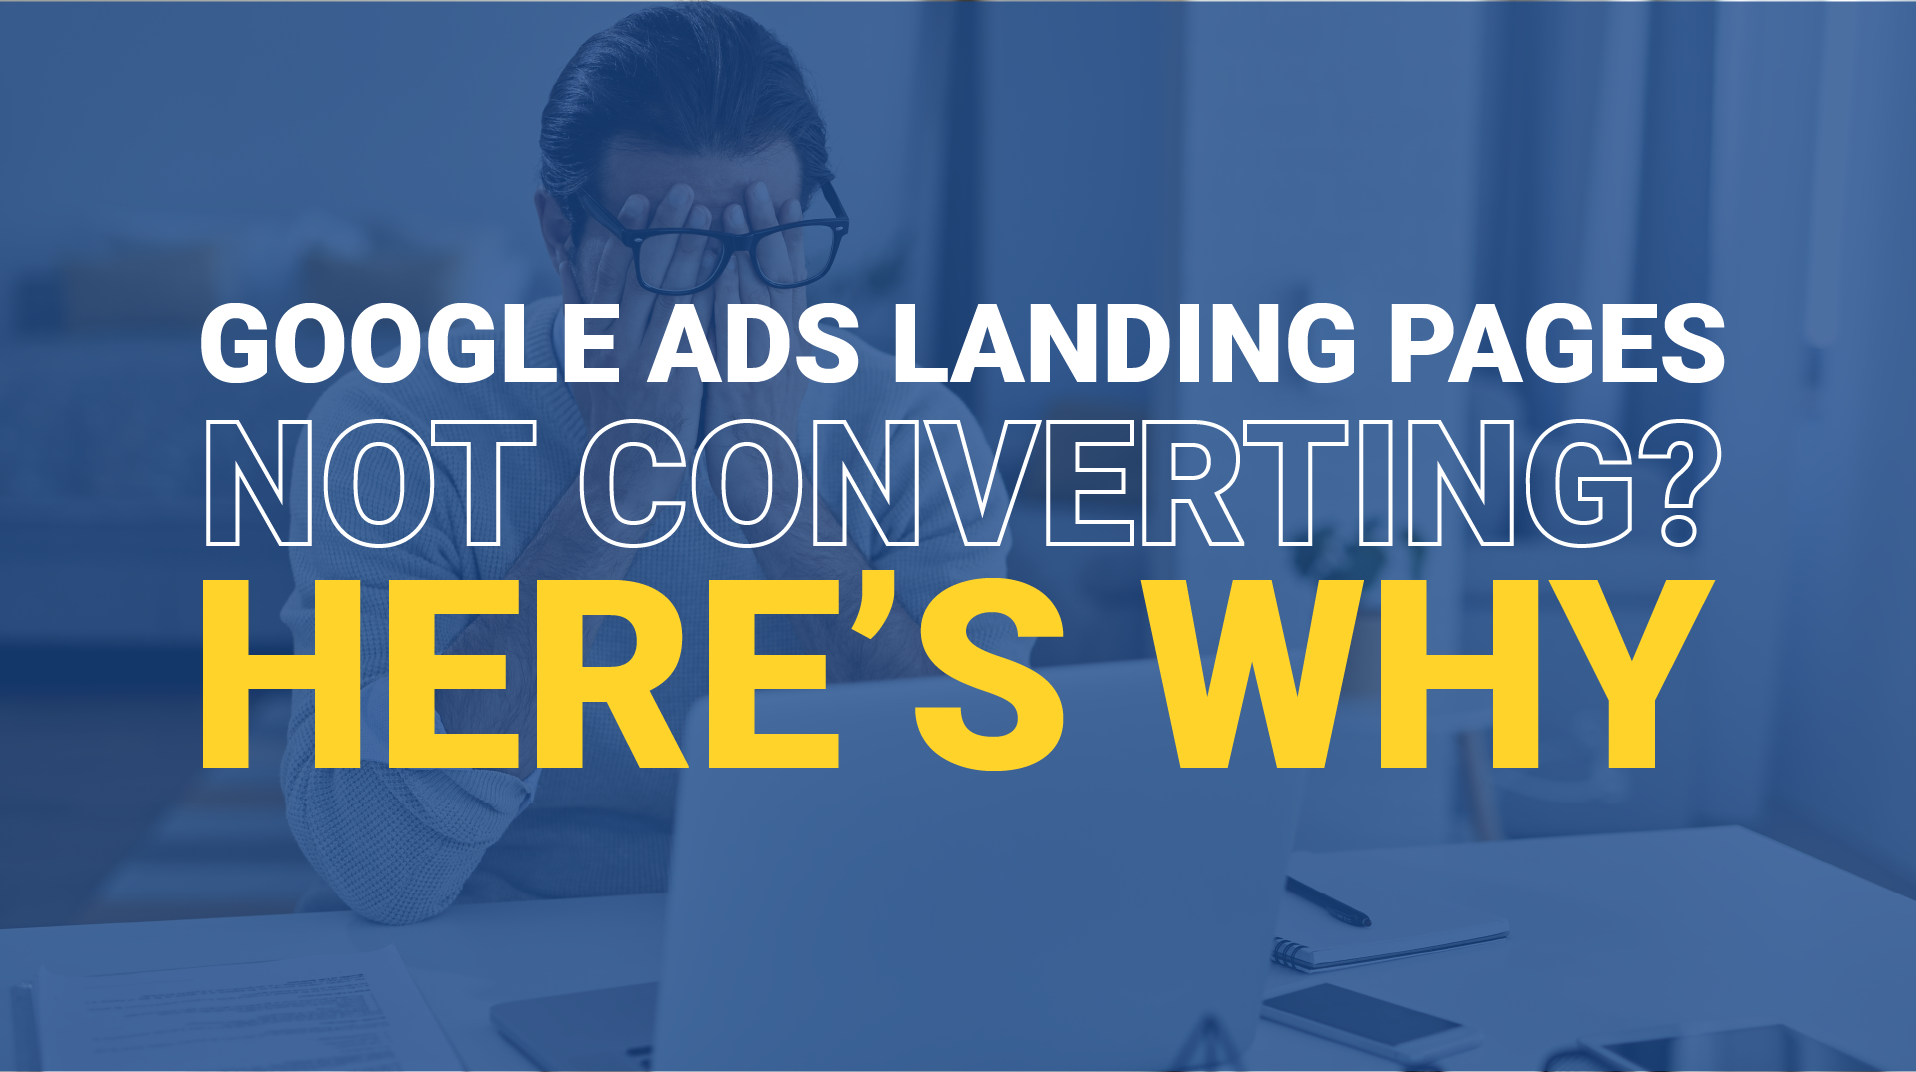 Google Ads landing page not converting?